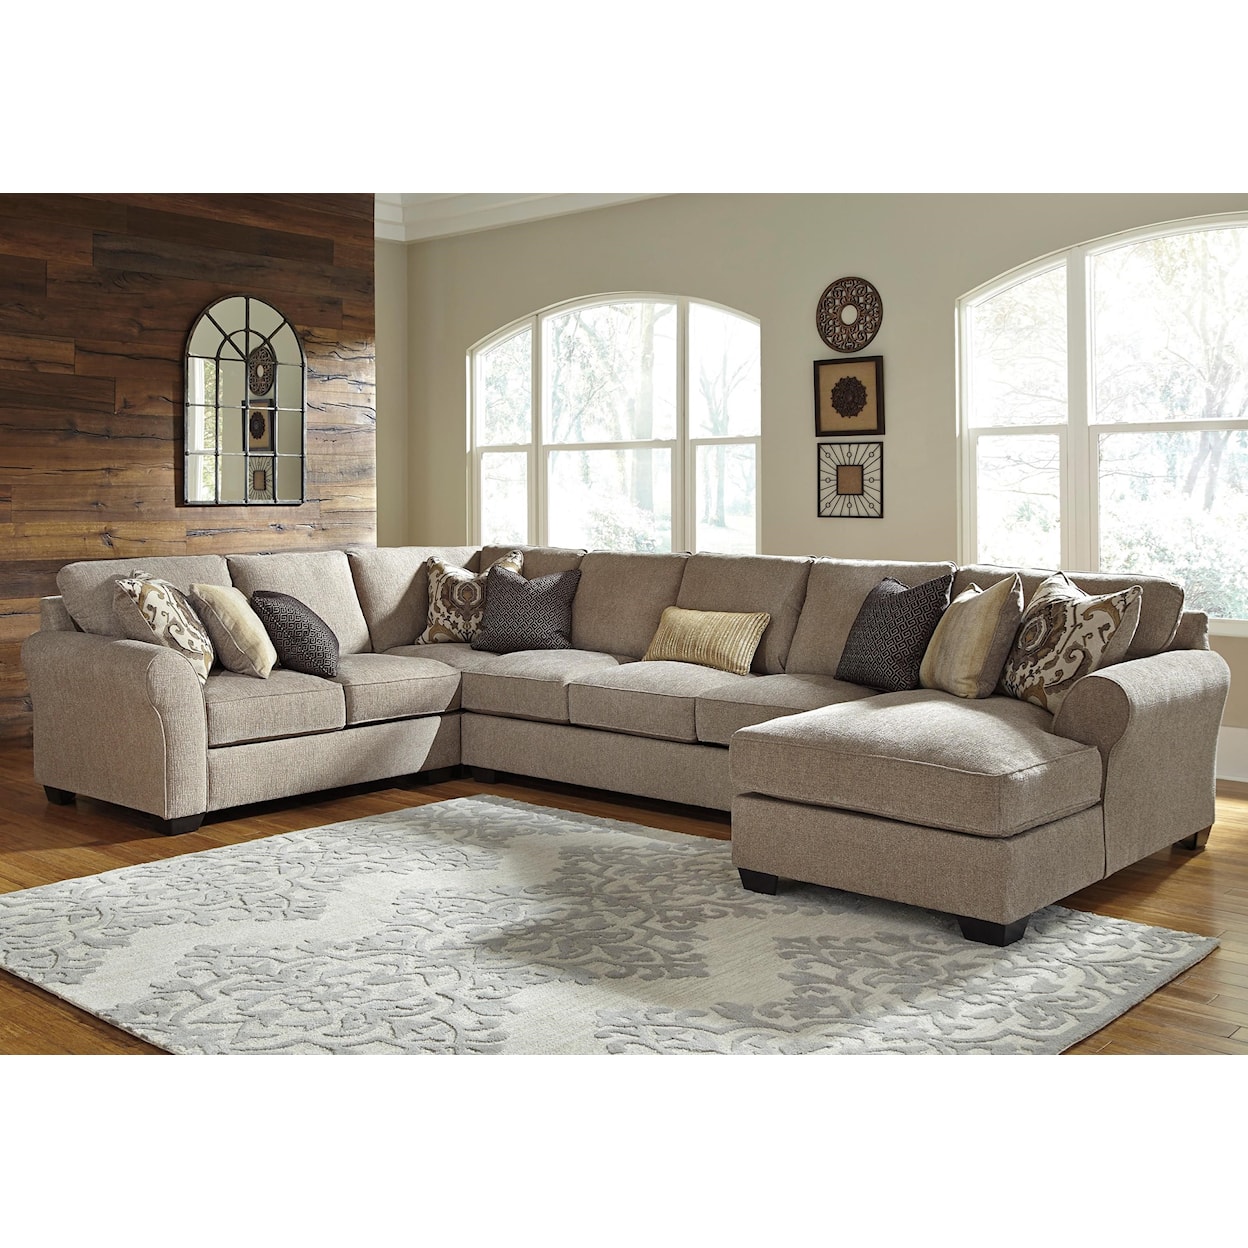 Benchcraft Pantomine 4-Piece Sectional with Chaise